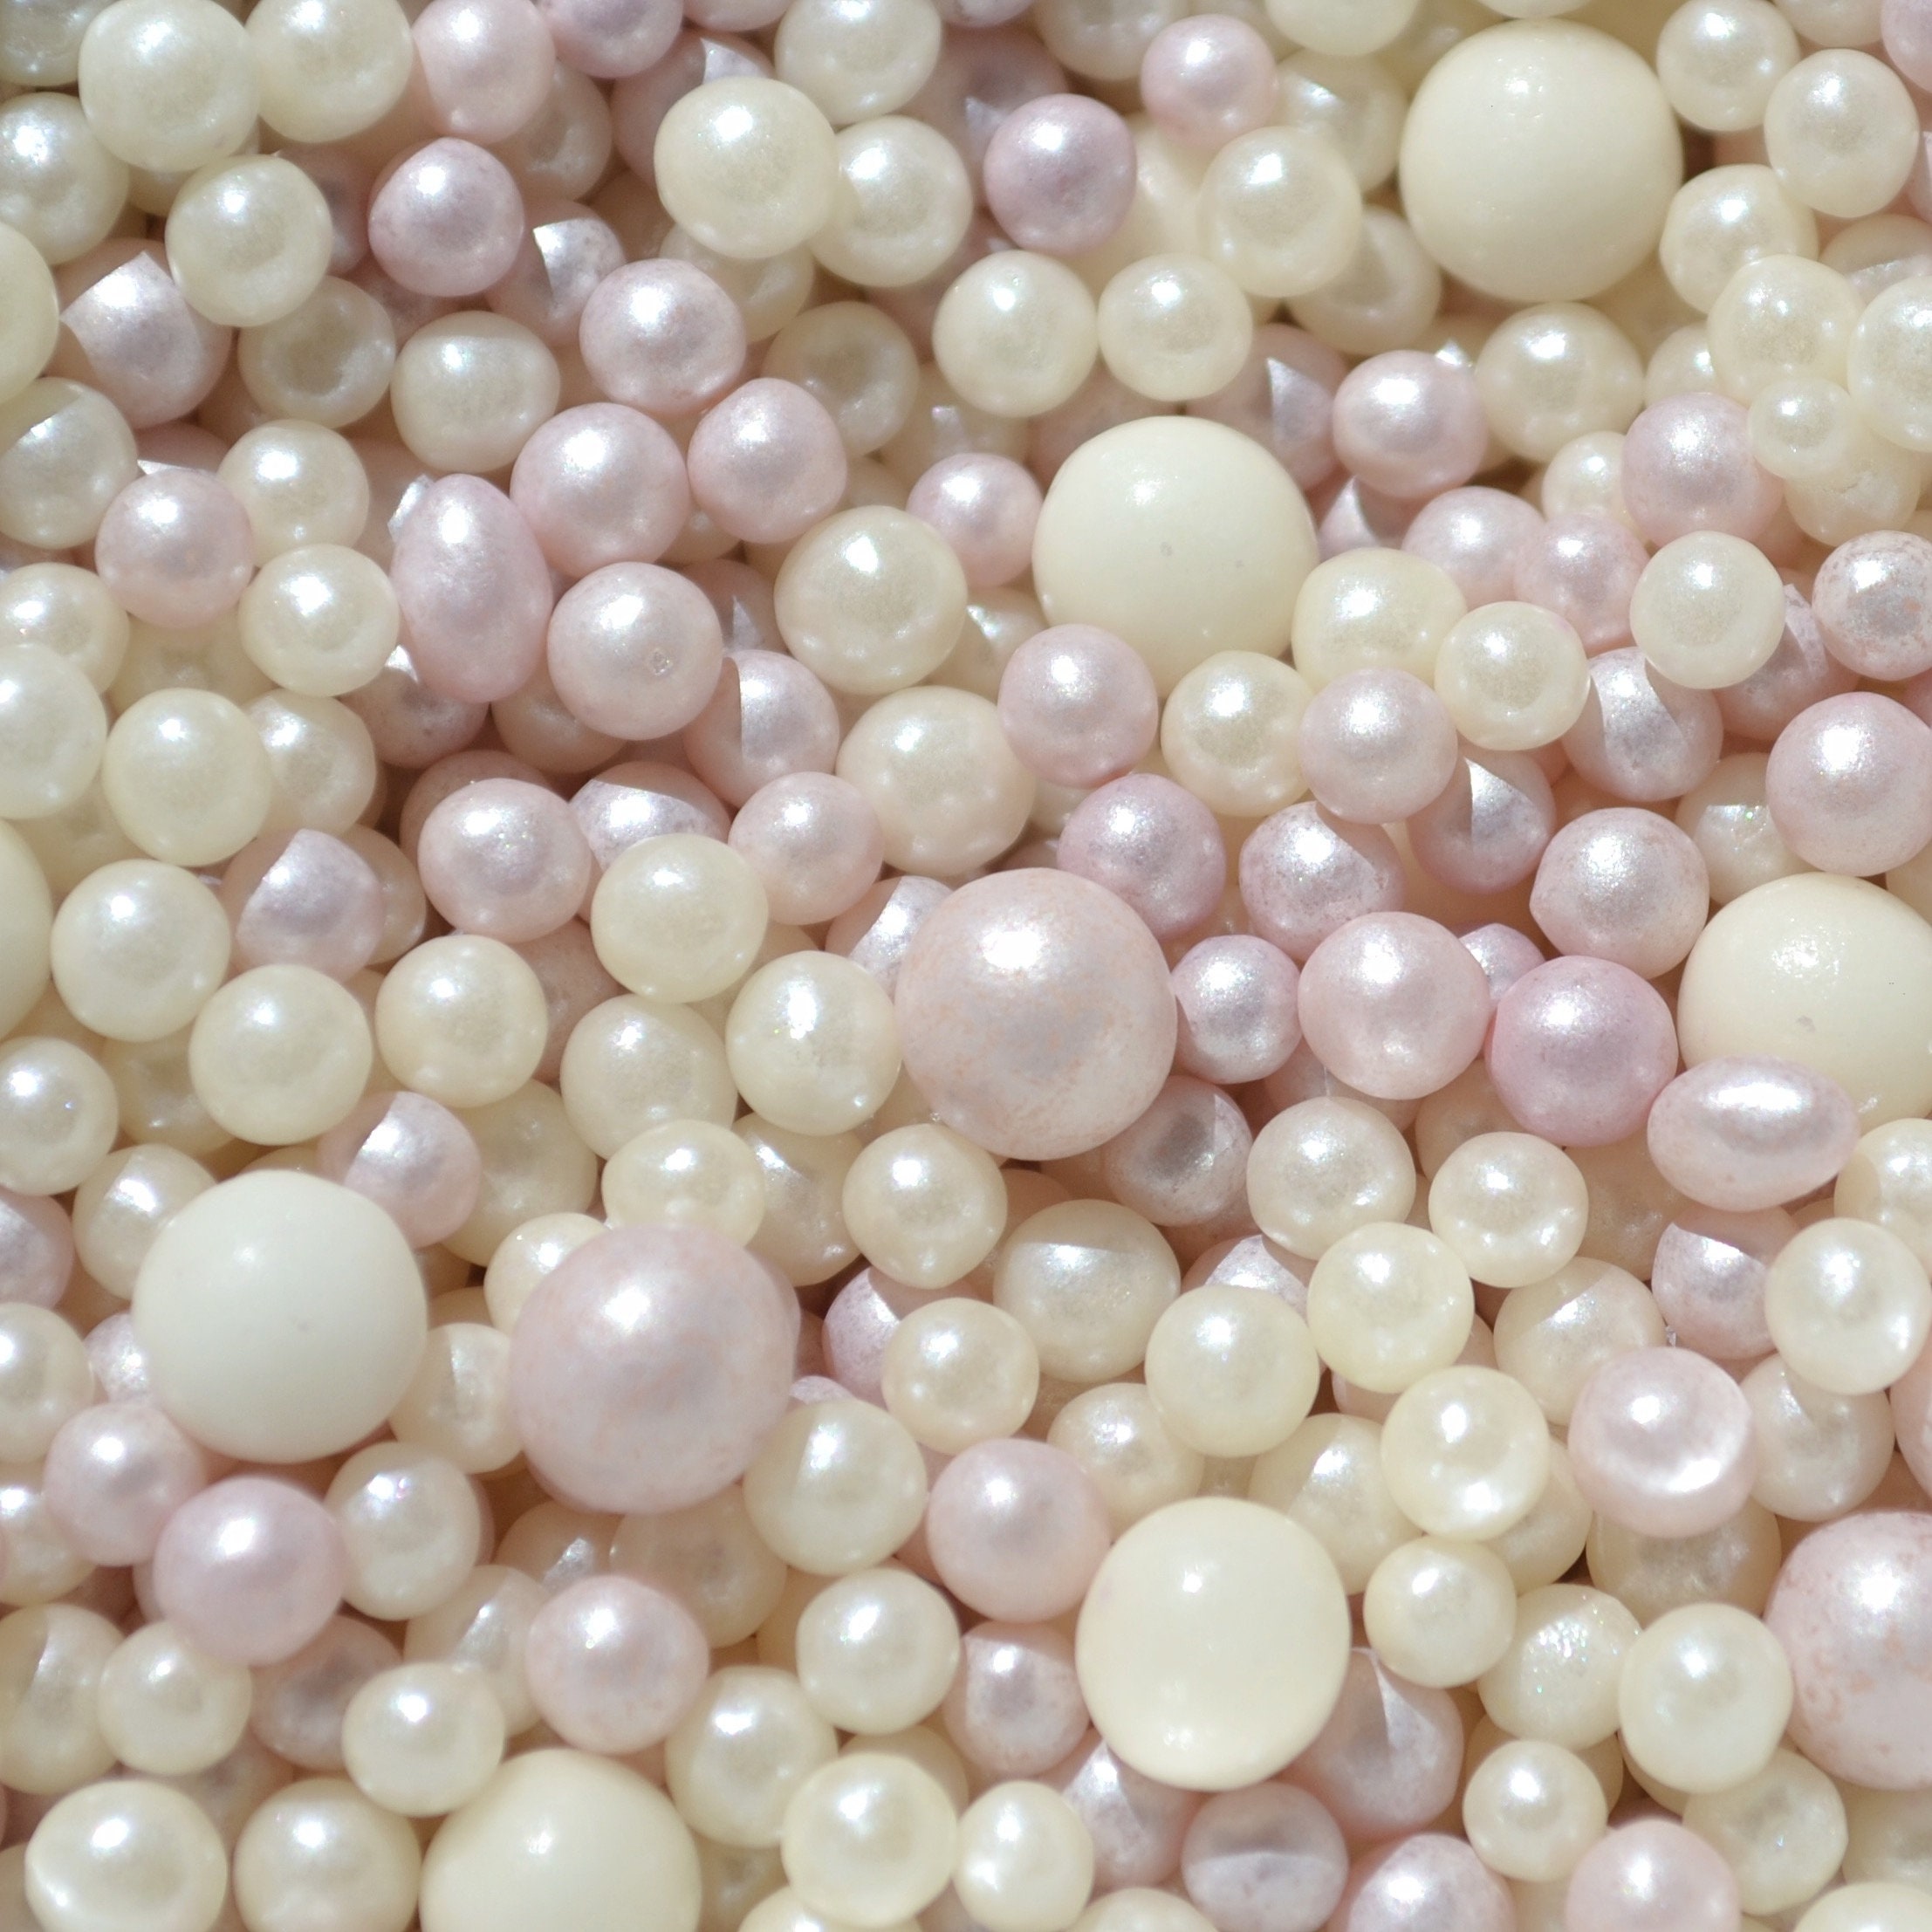 Pearly Light Coral Pink Sugar Pearls 5-6MM 1 LB